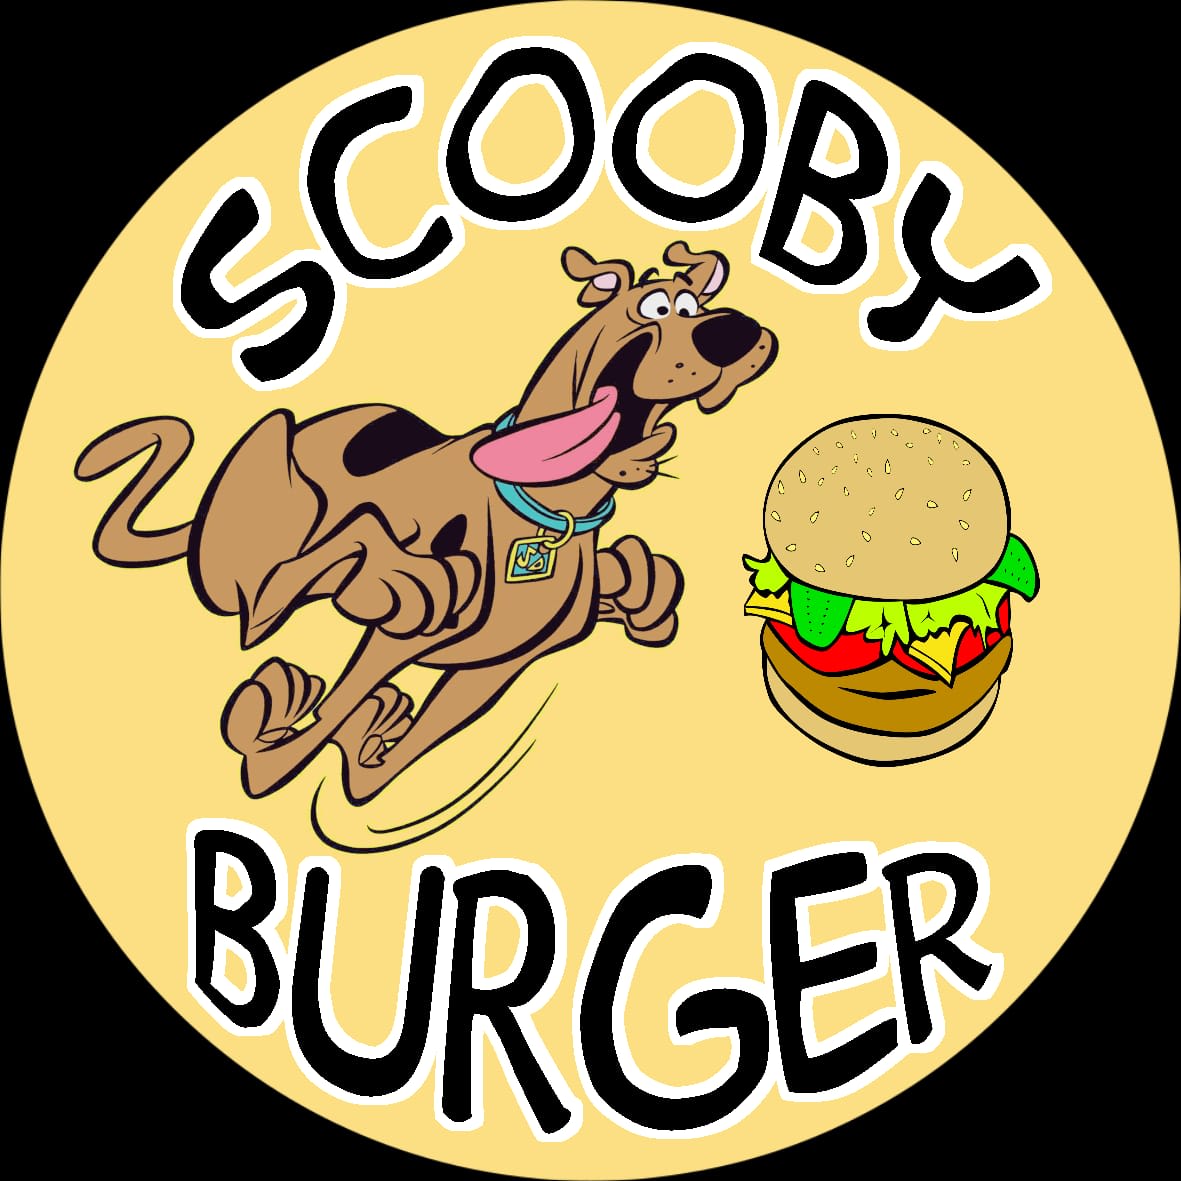 Scooby Burger